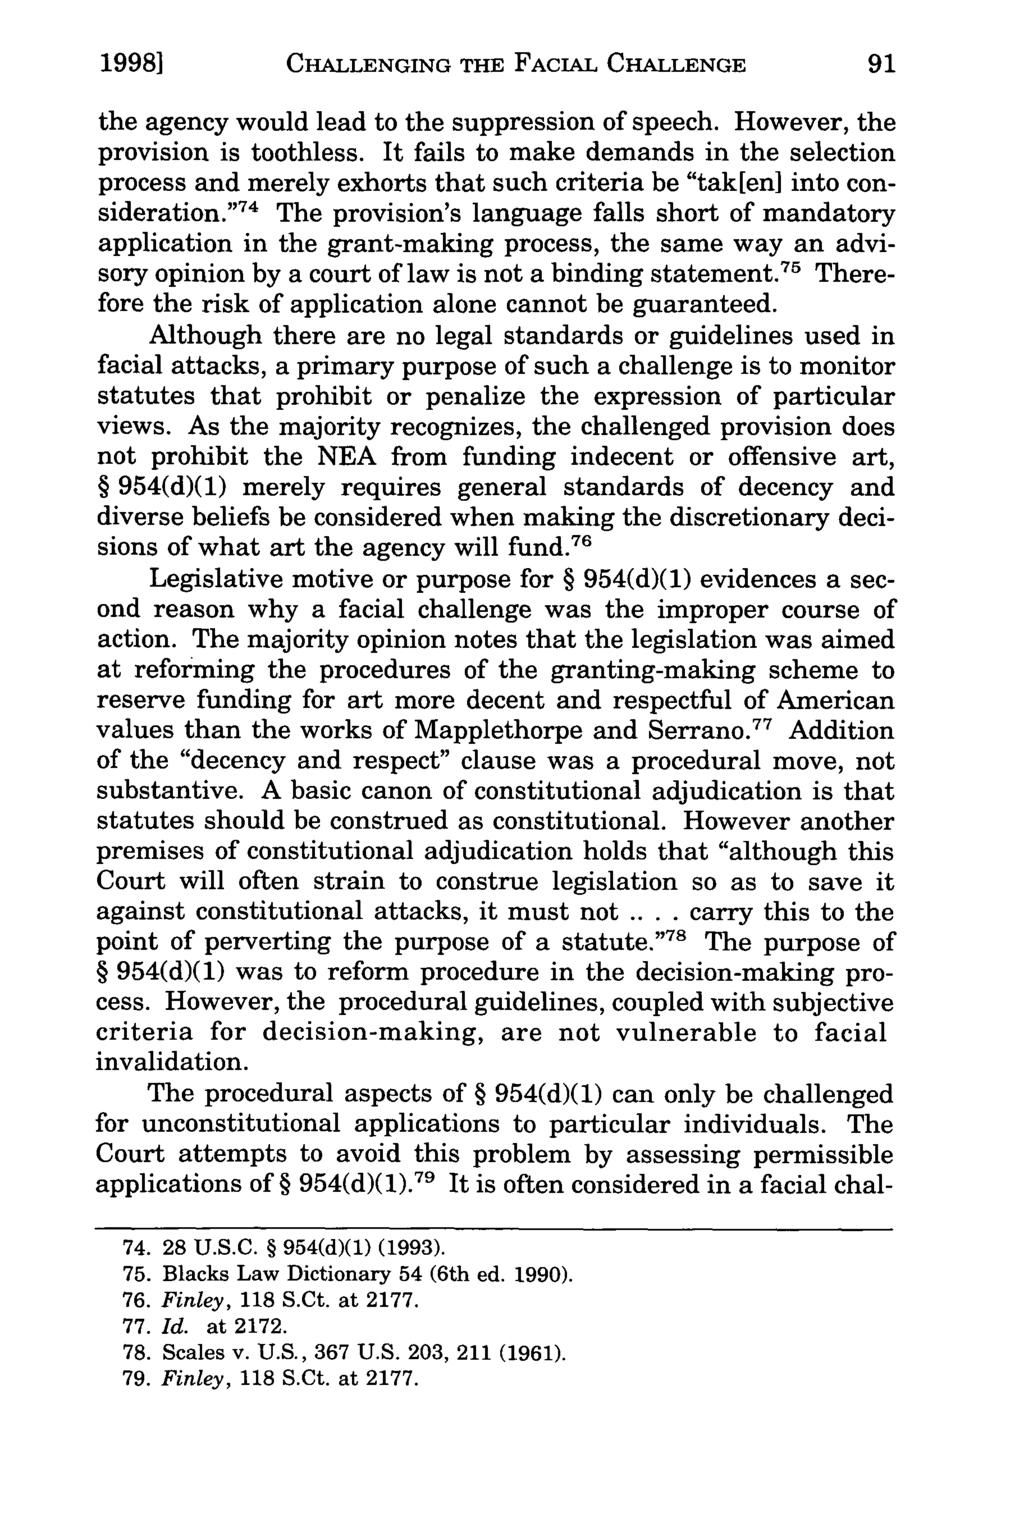 1998] Taft: National CHALLENGING Endowment for THE the Arts FACIAL v. Finley: CHALLENGE Challenging the Facial the agency would lead to the suppression of speech. However, the provision is toothless.